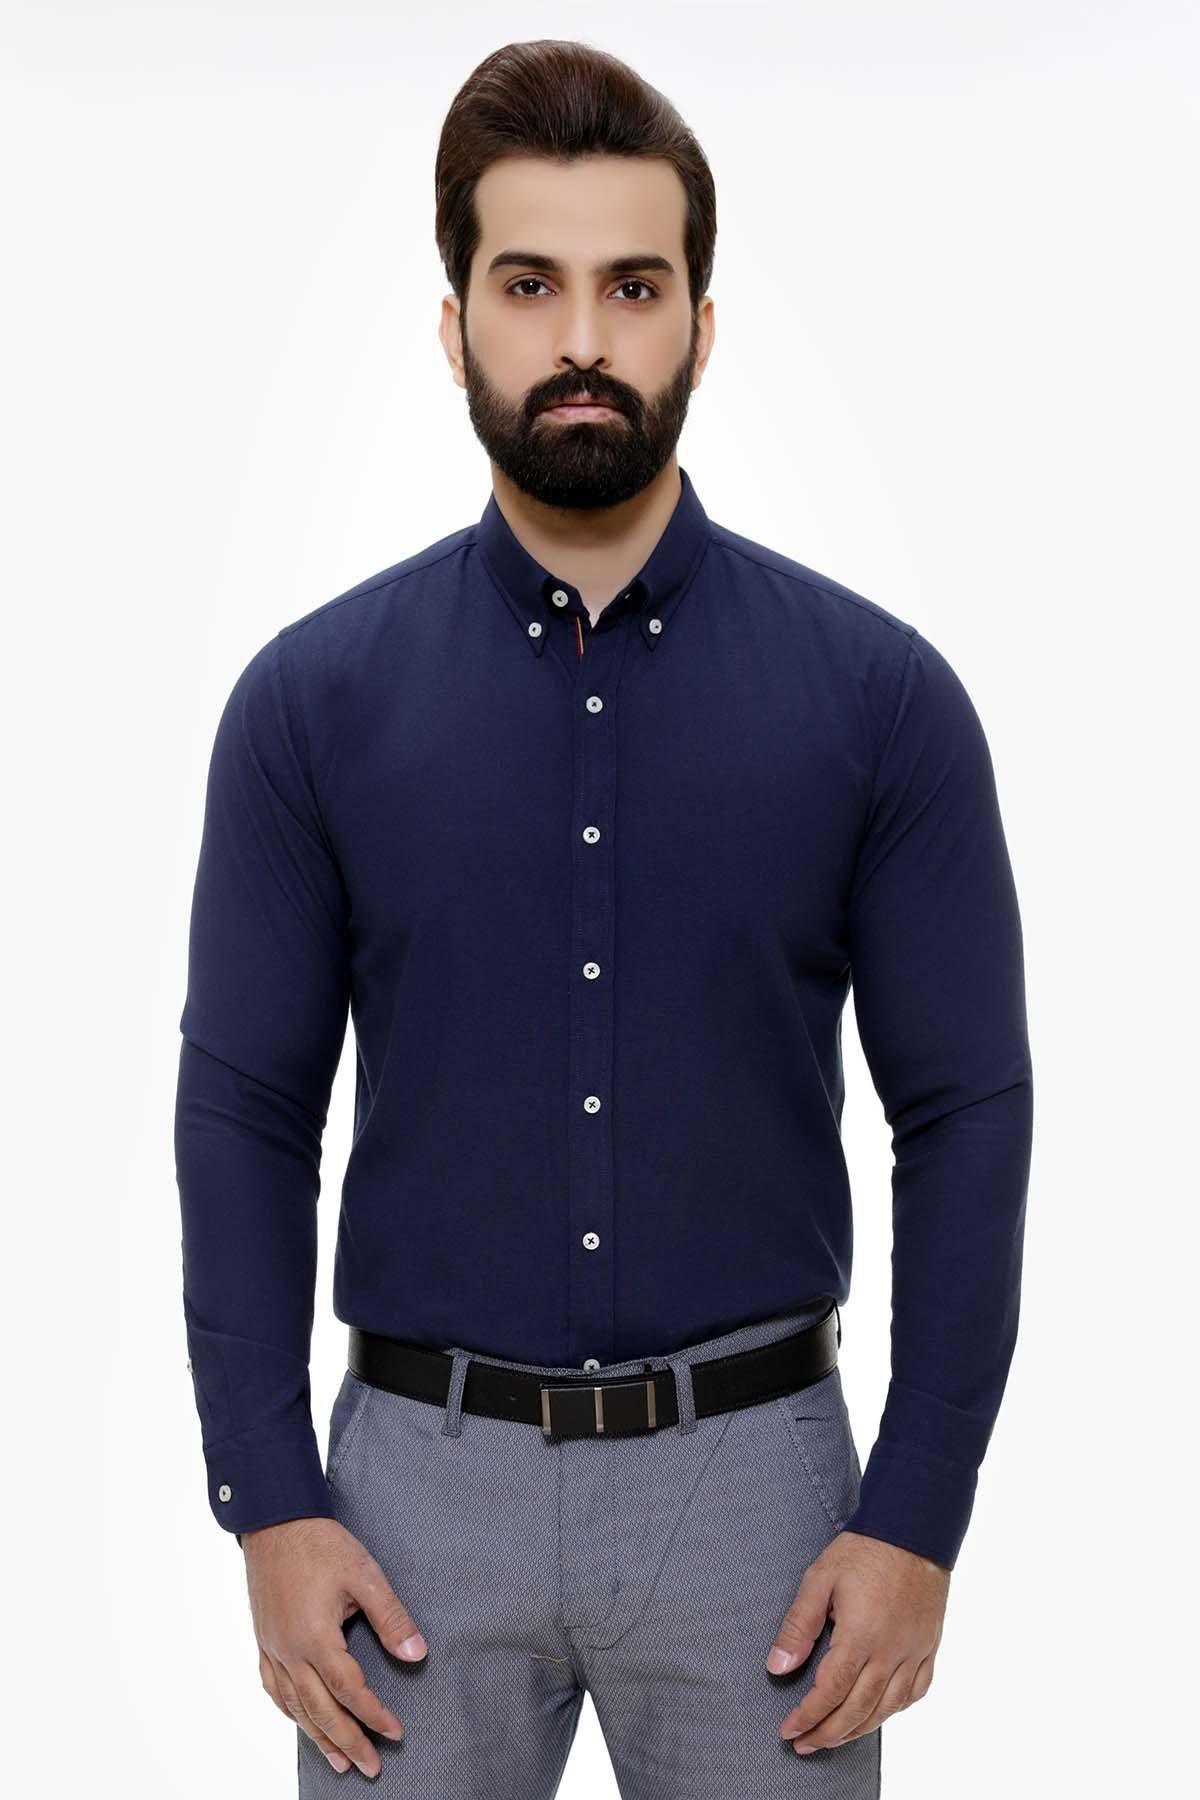 SMART SHIRT FULL SLEEVE BUTTON DOWN NAVY at Charcoal Clothing